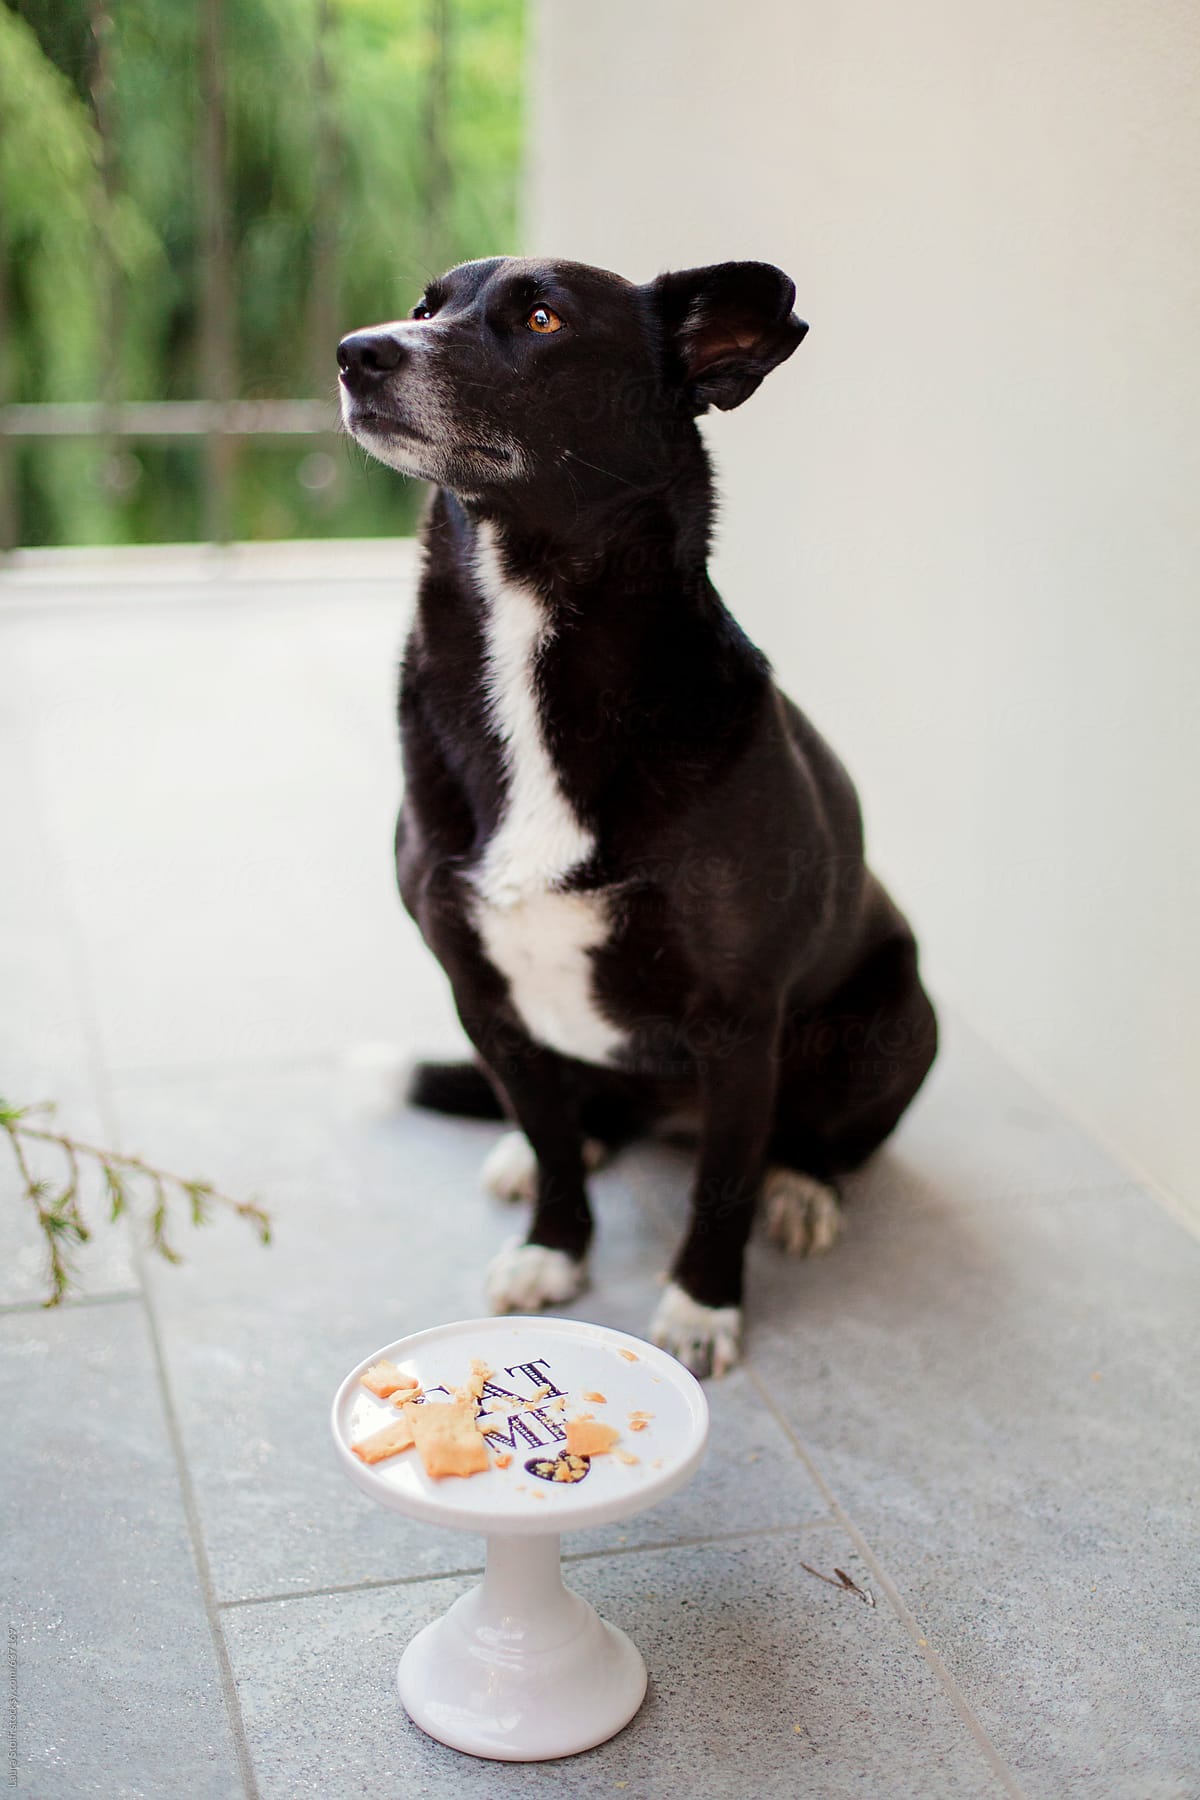 Dog sits waiting for eating cracker on cake stand in front of her